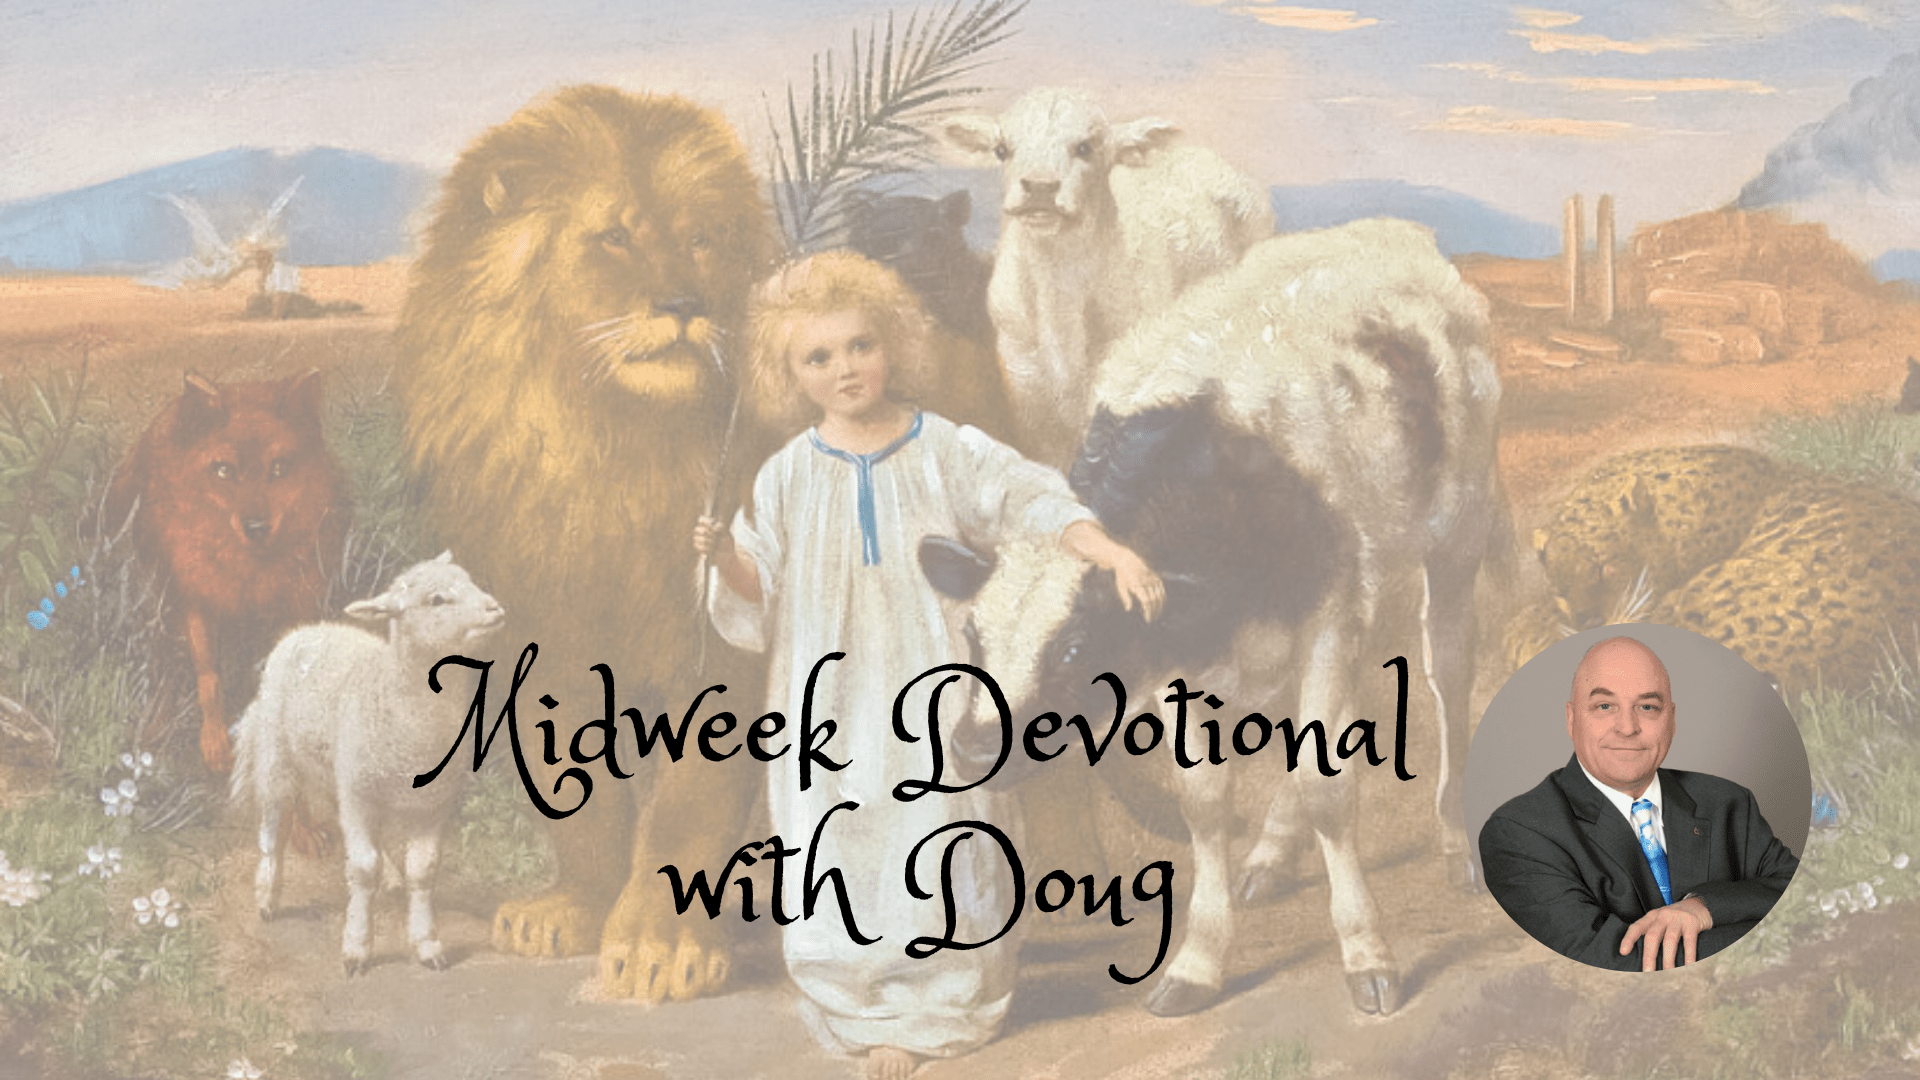 Midweek Devotional with Doug for third week of November